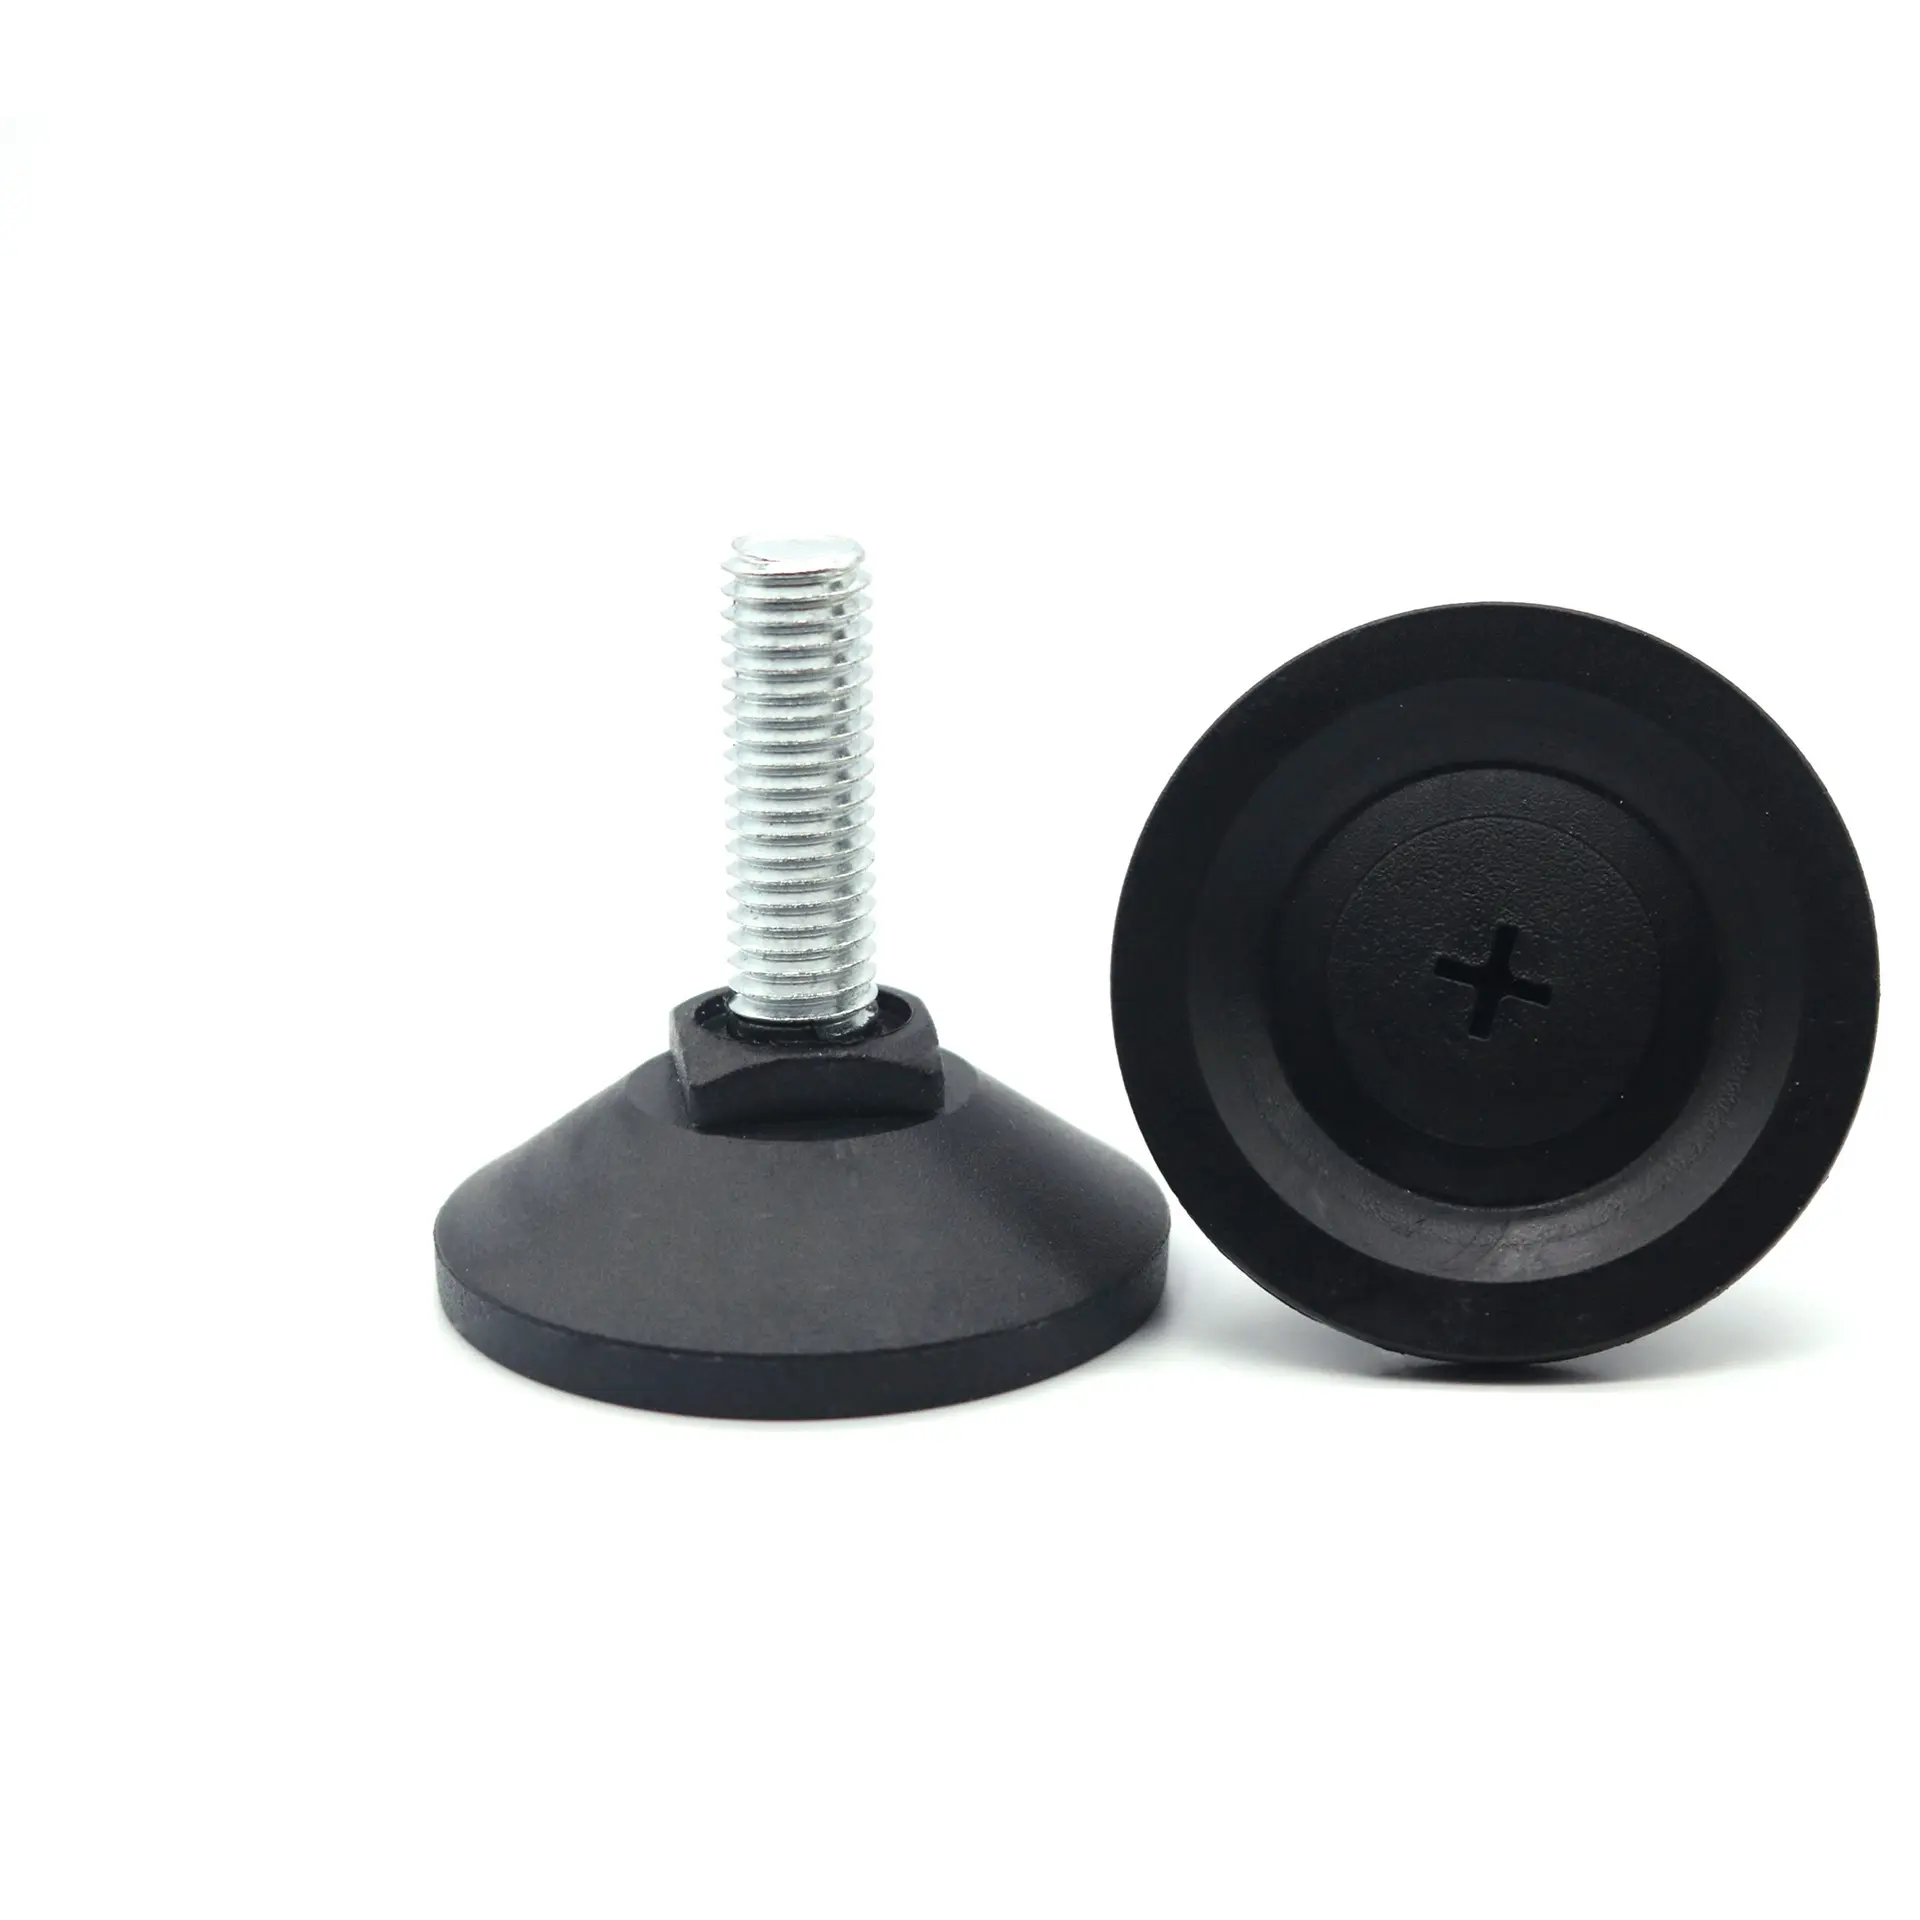 Factory Stainless Steel Furniture Levelers Adjustable Screw Feet Table Screw for Table, Chair, Cabinet, Patio